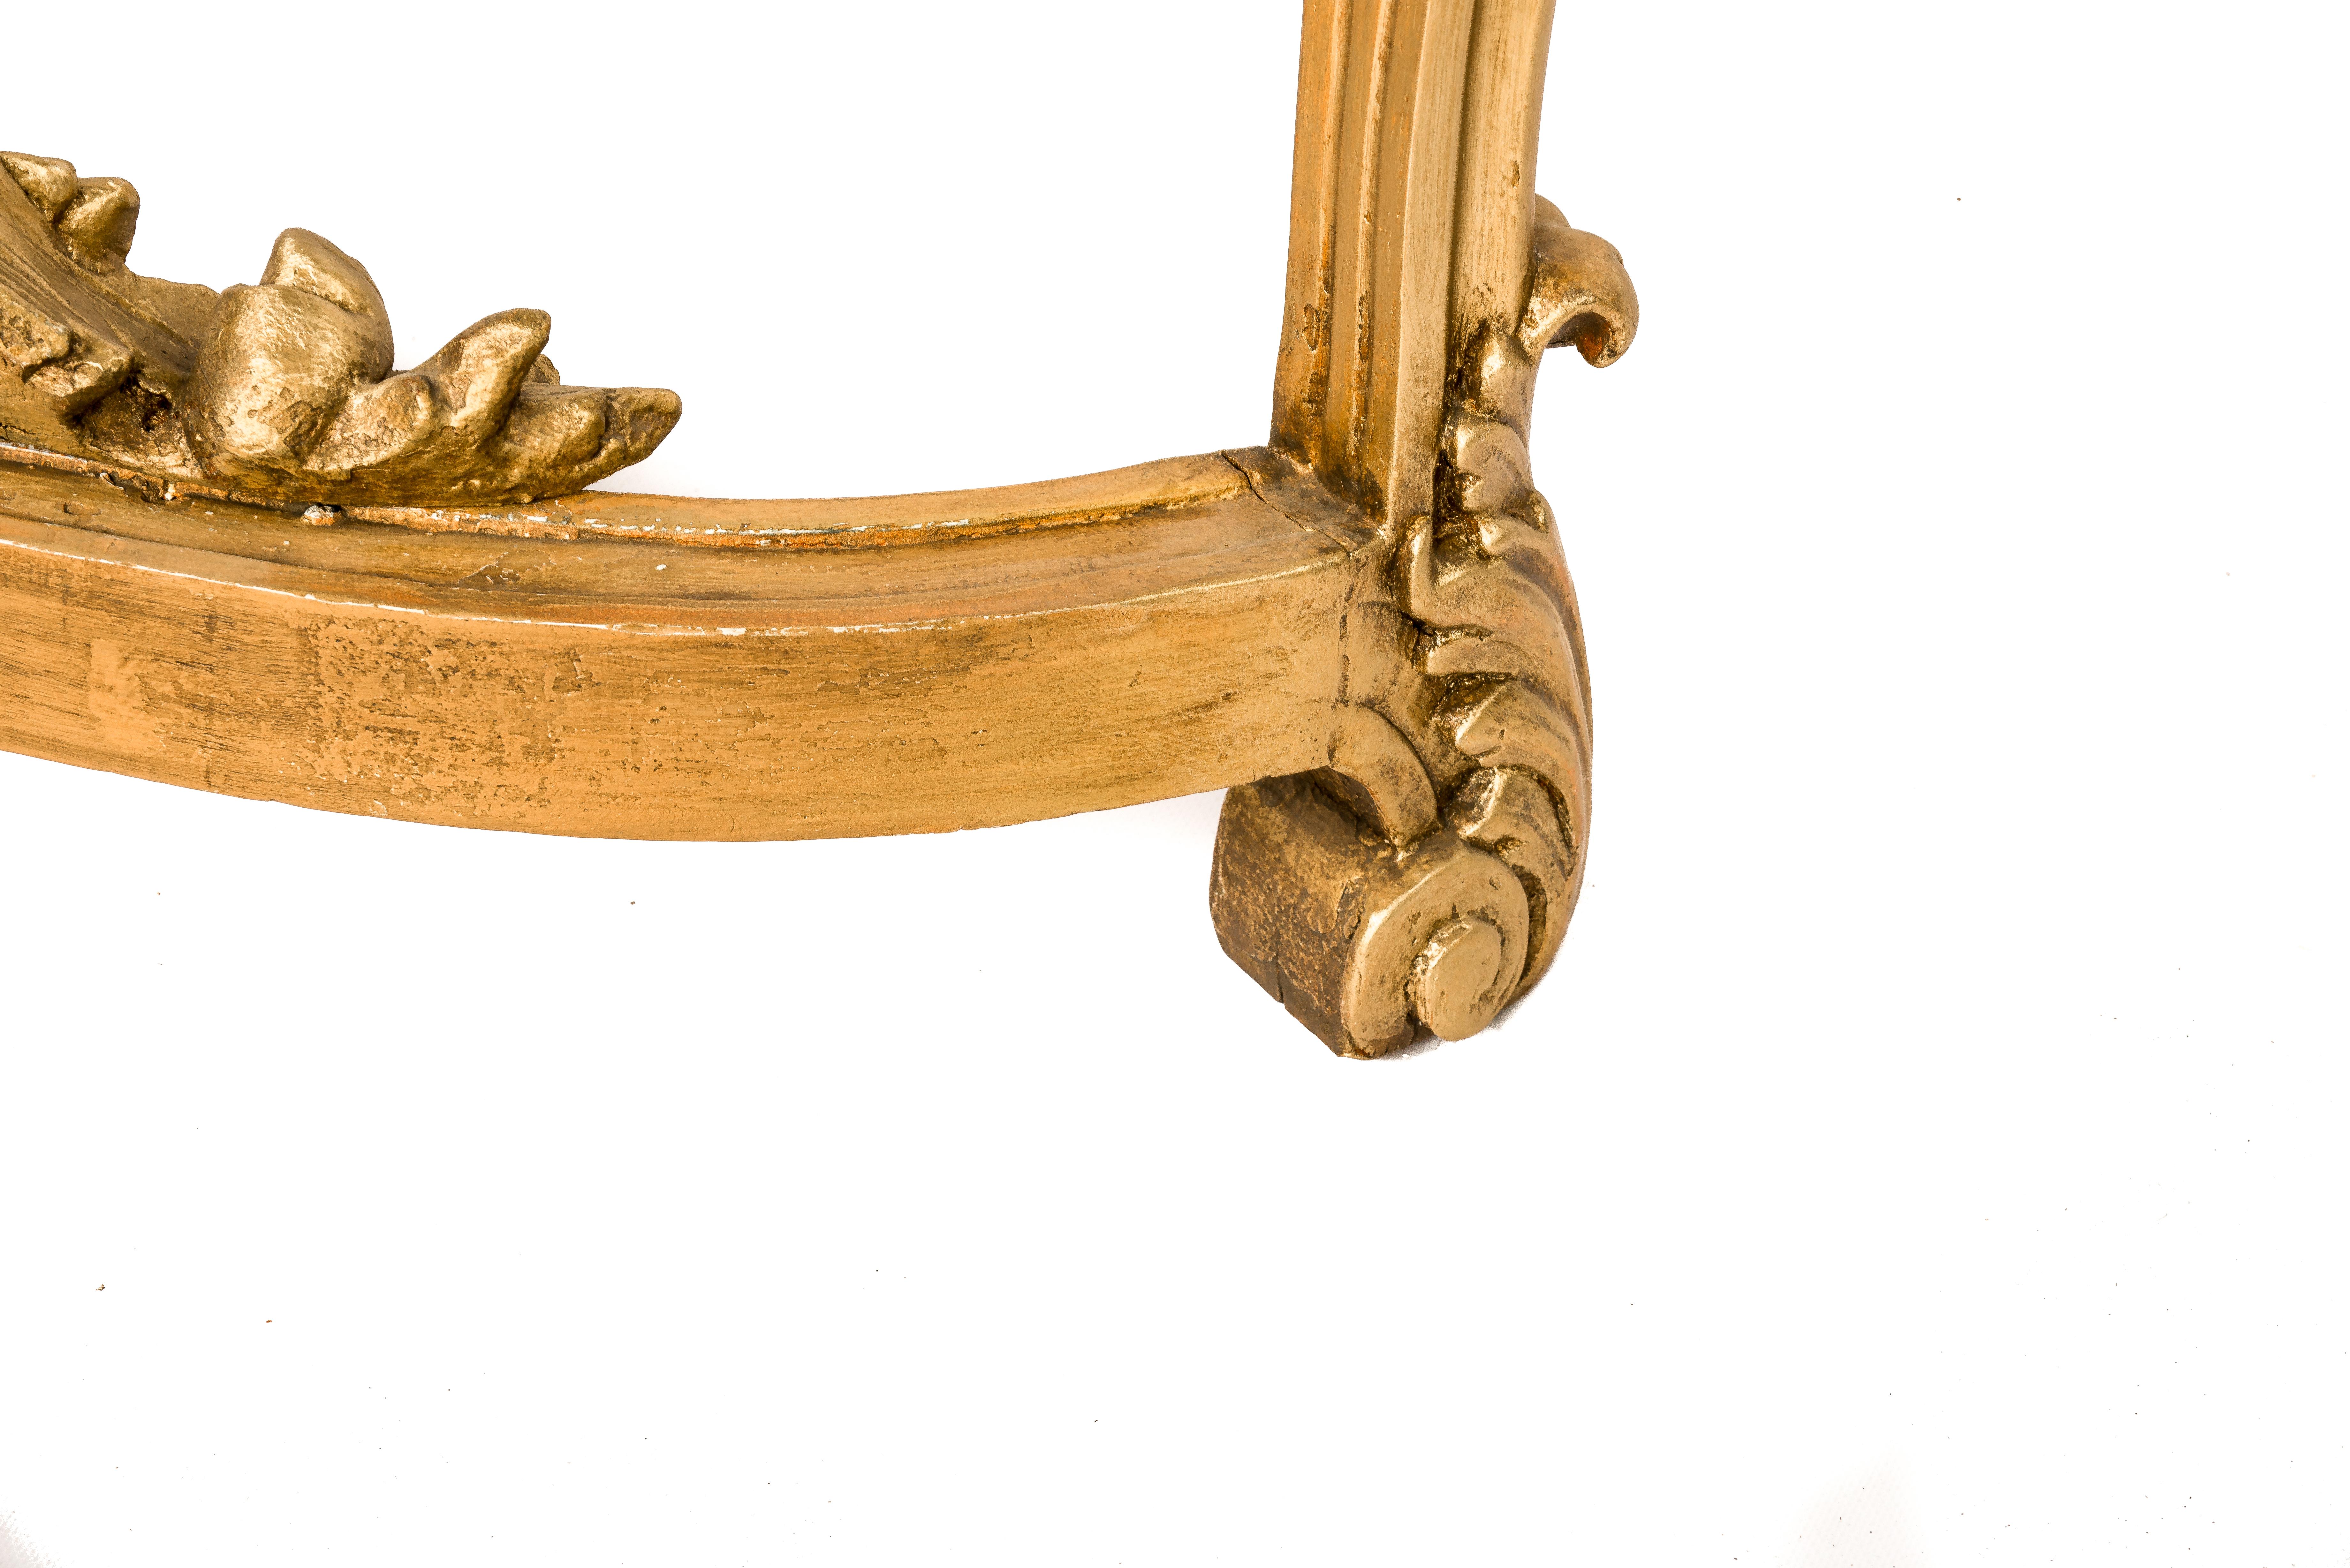 Gesso Antique 19th century French Gold Baroque Console Table,  Bianca Rosa Marble Top For Sale